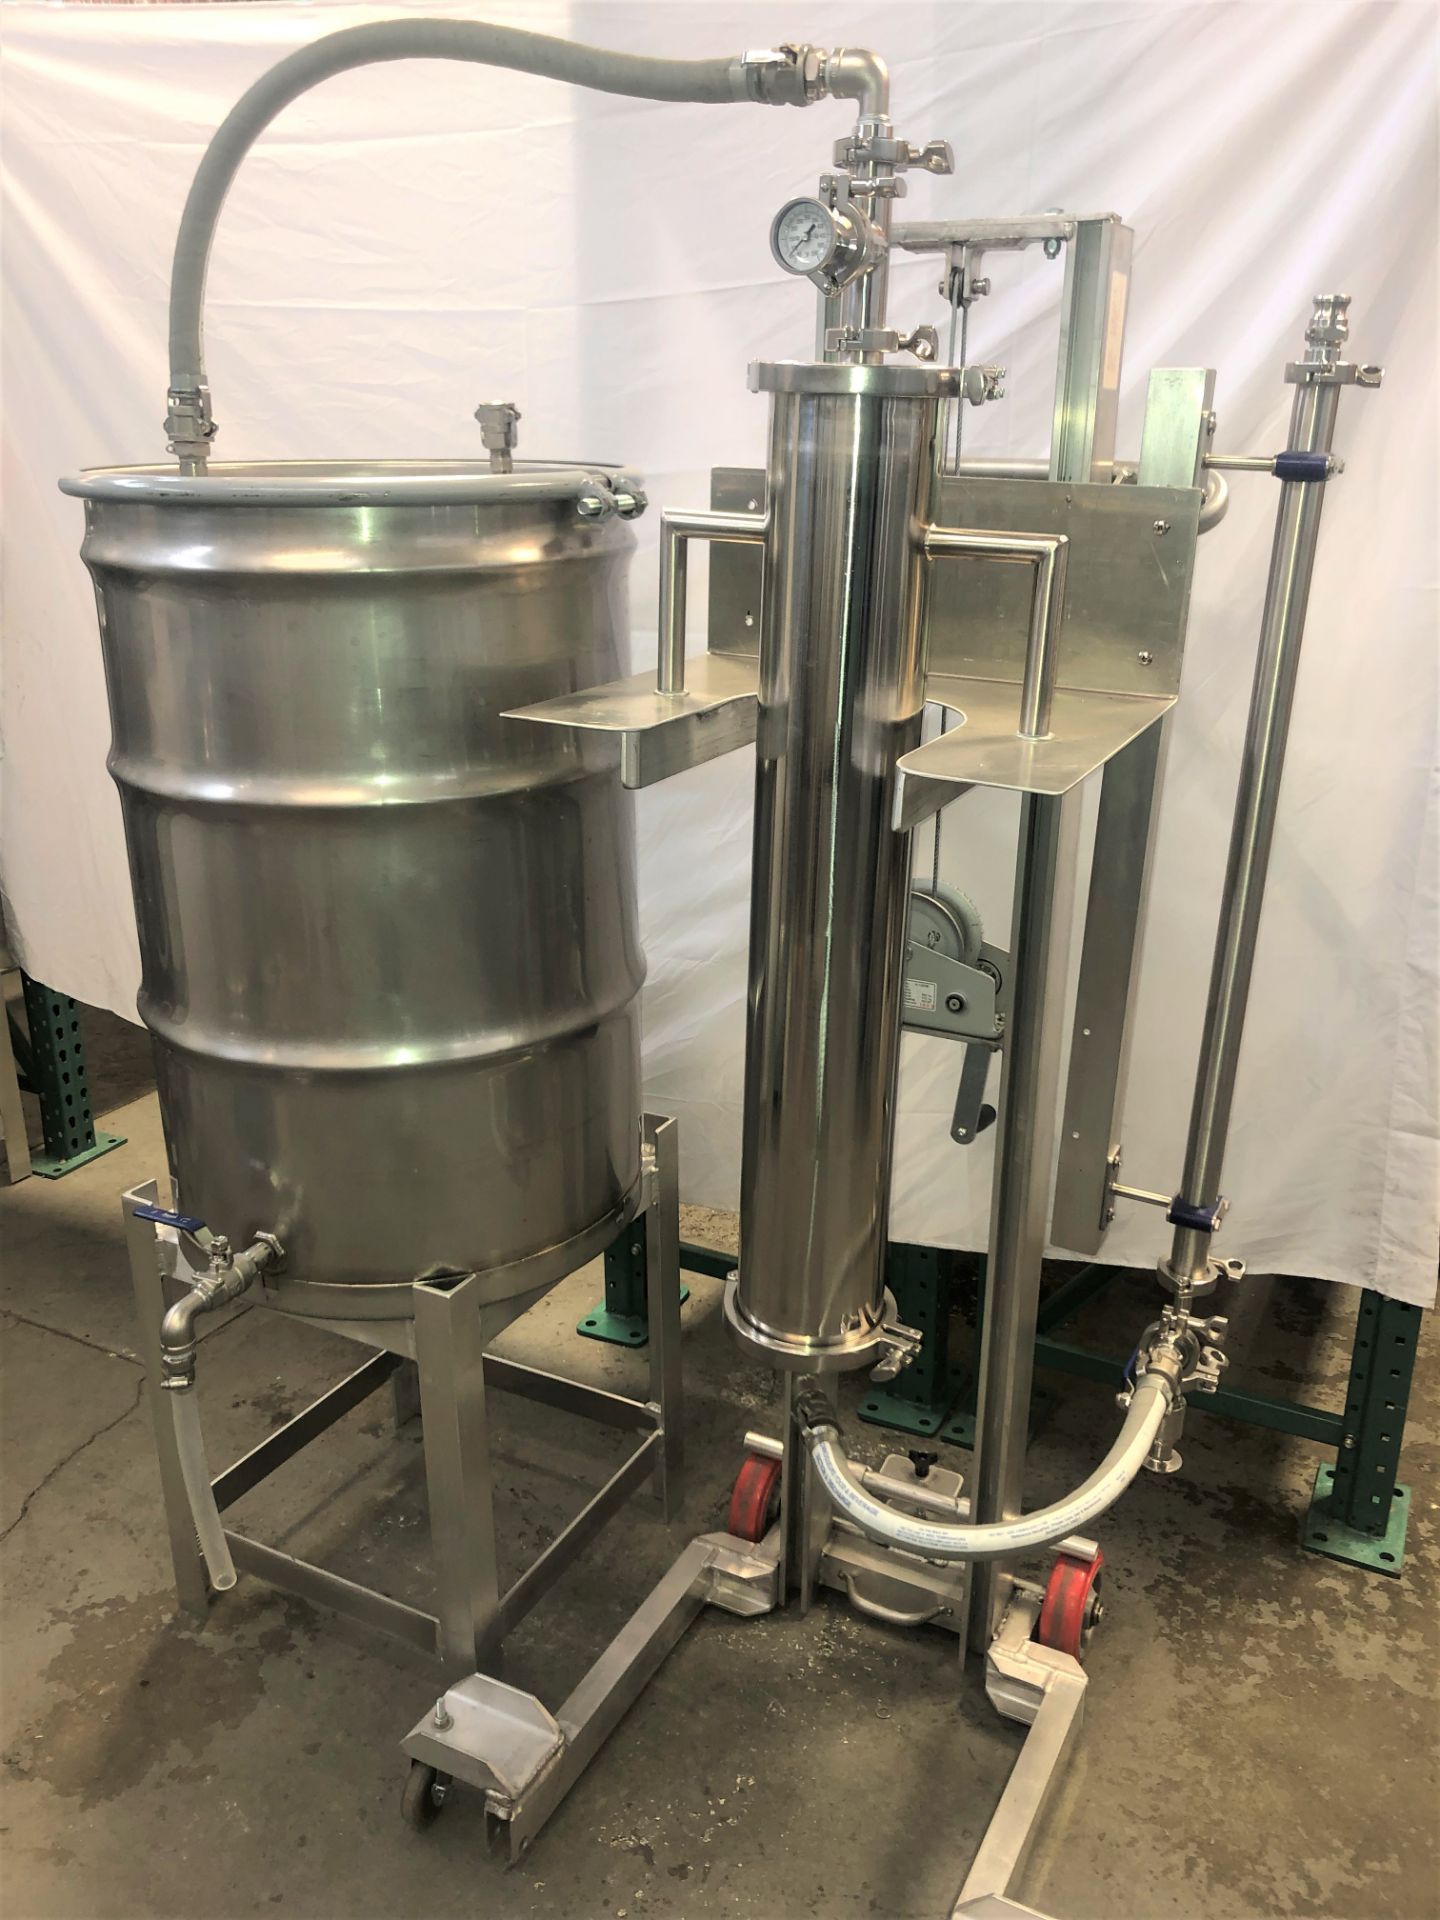 Used/Refurbished-CRCfilters Ethanol Dehydration System EDH-25. 25lb capacity 55 gal collection drum.